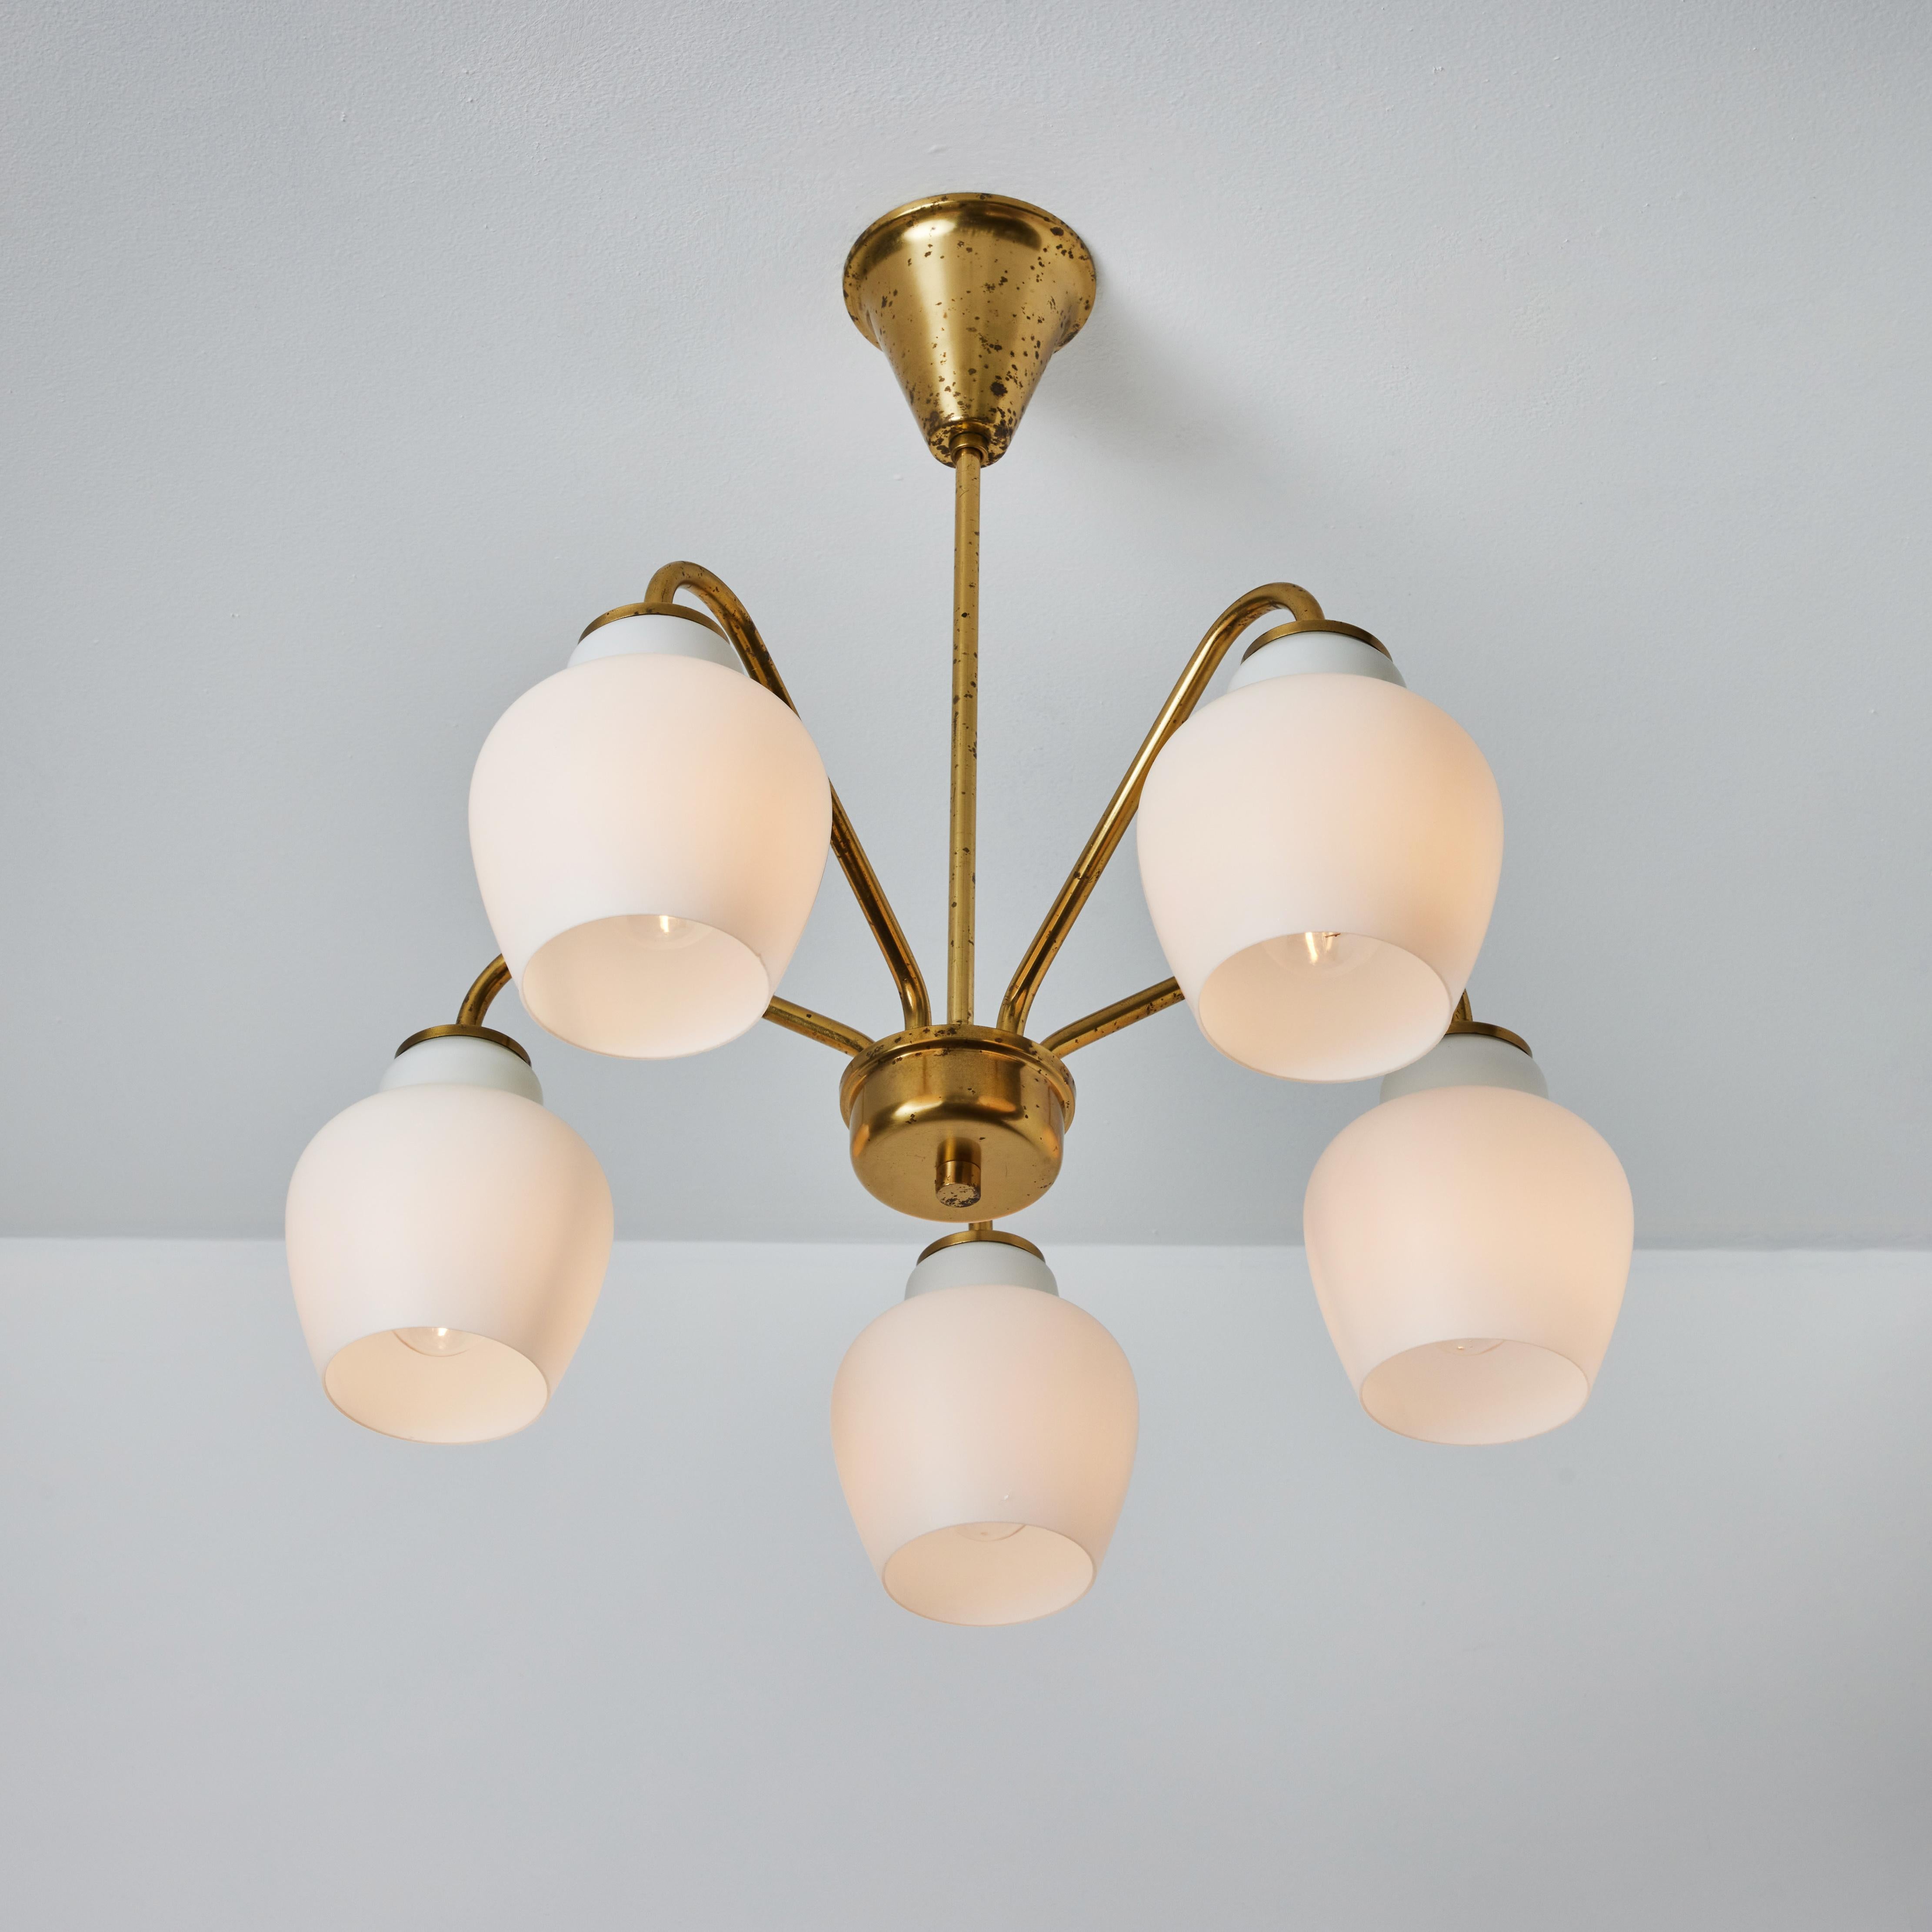 Large Bent Karlby 5-arm glass and brass chandelier for Lyfa. Executed in patinated brass with five opaline blown glass shades, Denmark, circa 1950s. A quintessentially Danish Modern chandelier by a master designer whose exquisitely crafted pieces